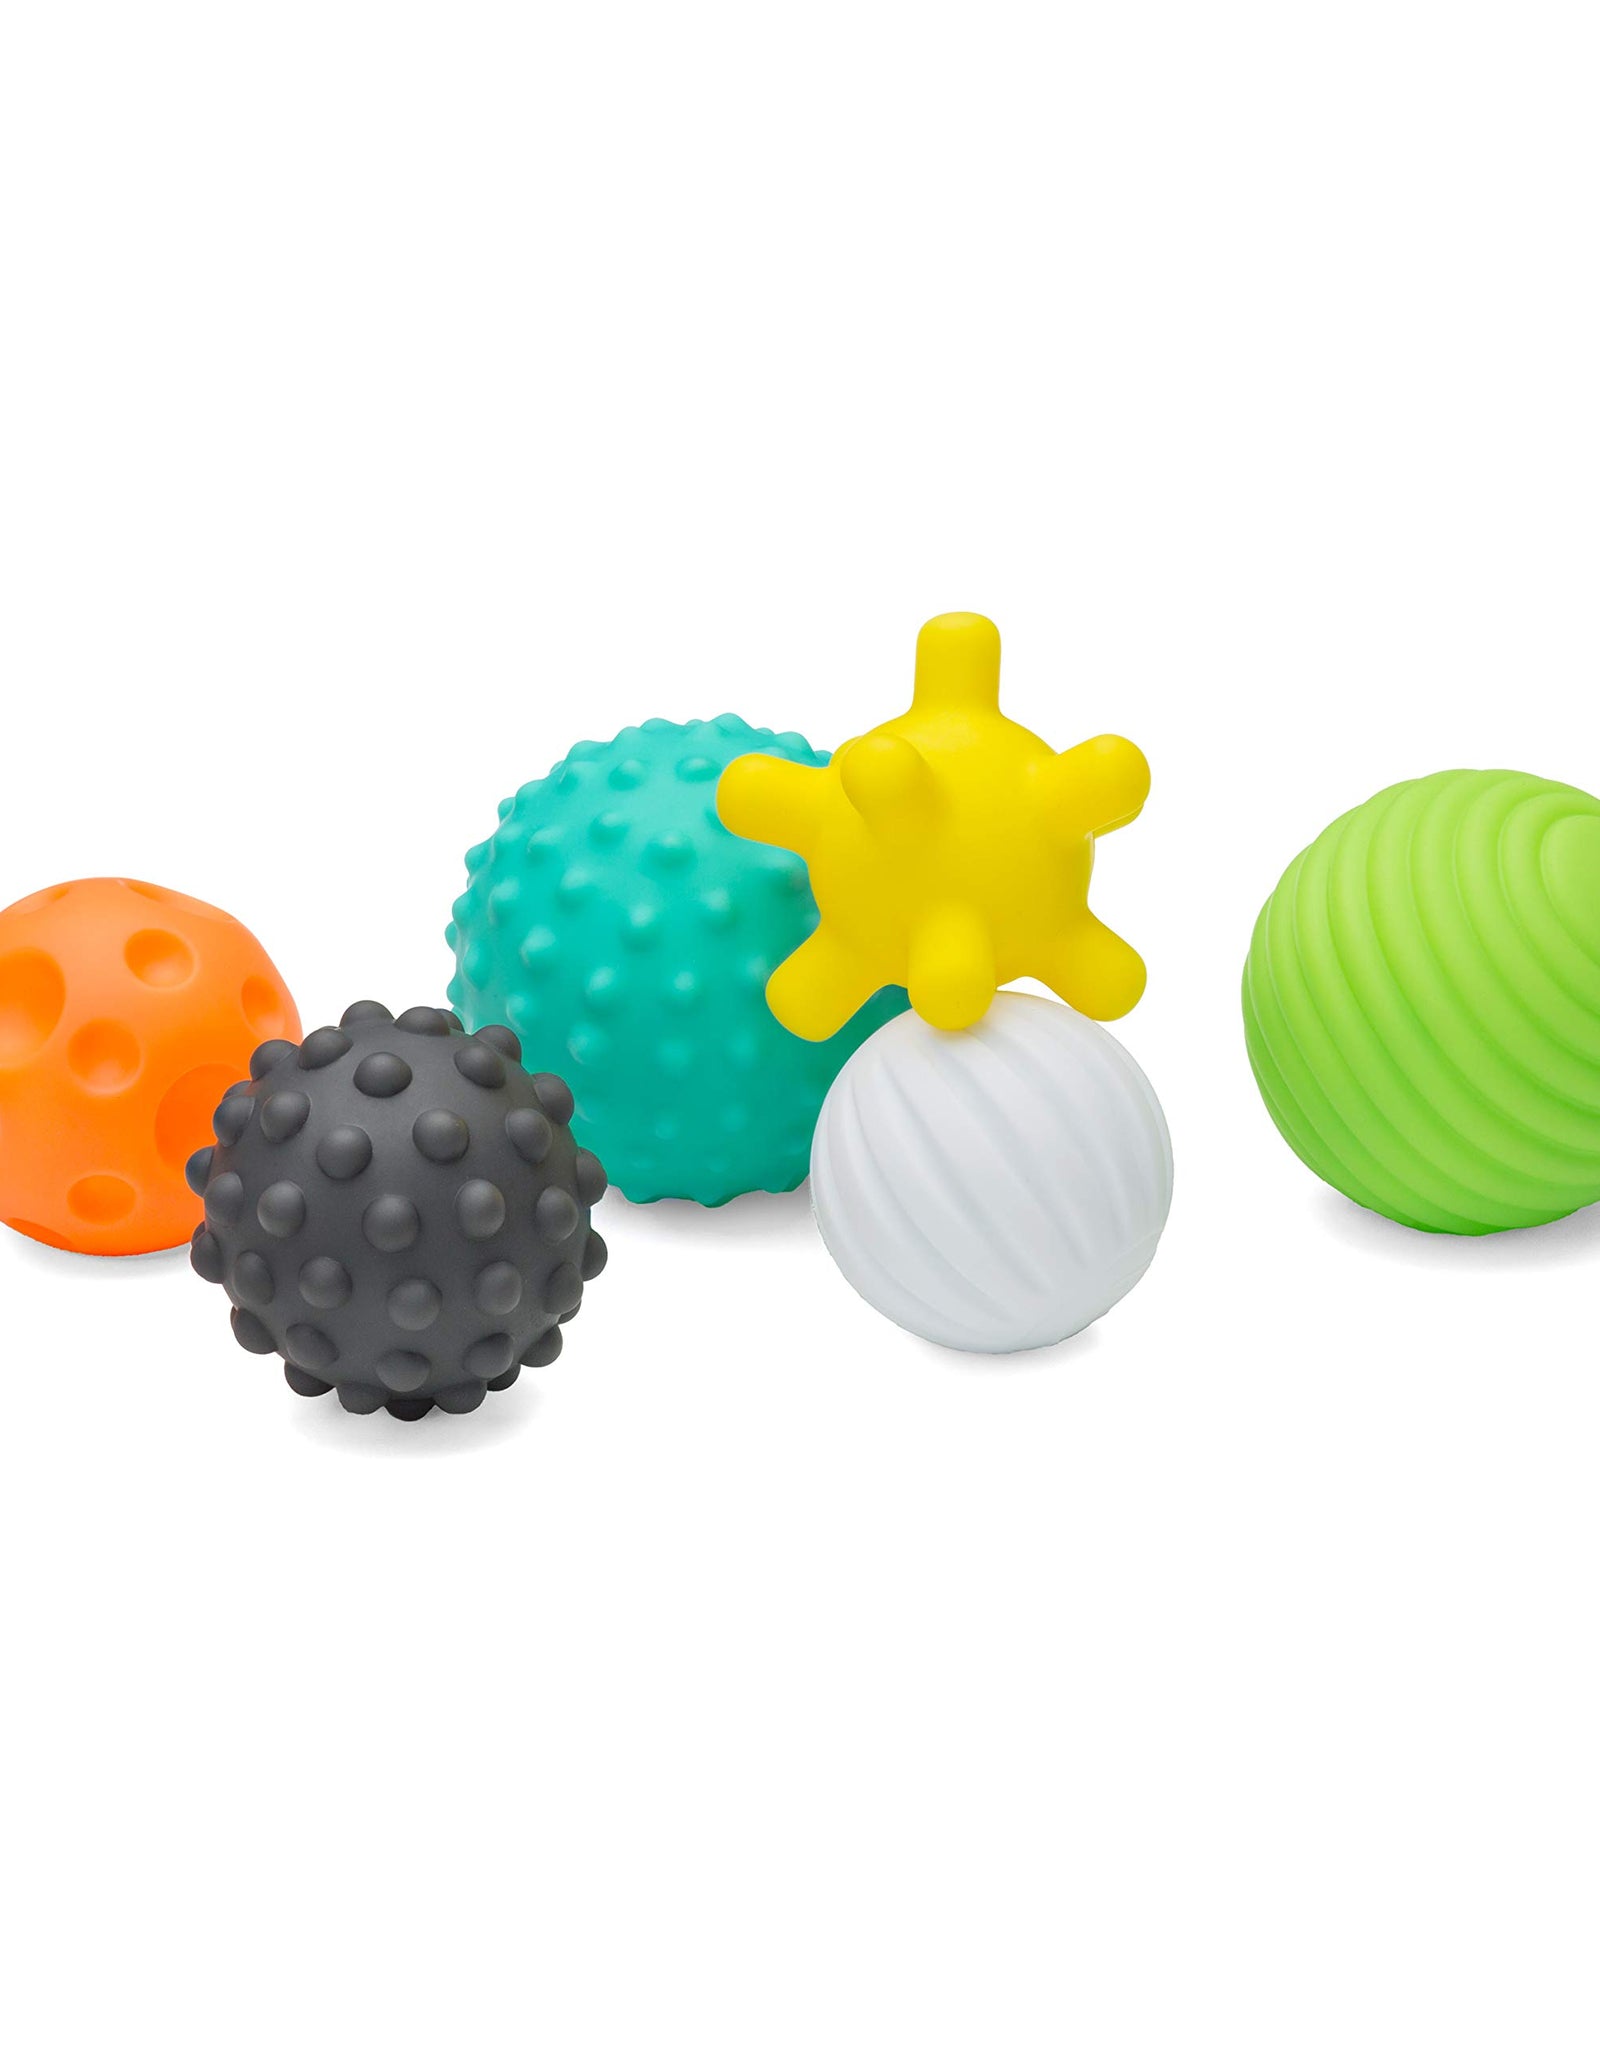 Infantino Textured Multi Ball Set - Textured Ball Set Toy for Sensory Exploration and Engagement for Ages 6 Months and up, 6 Piece Set